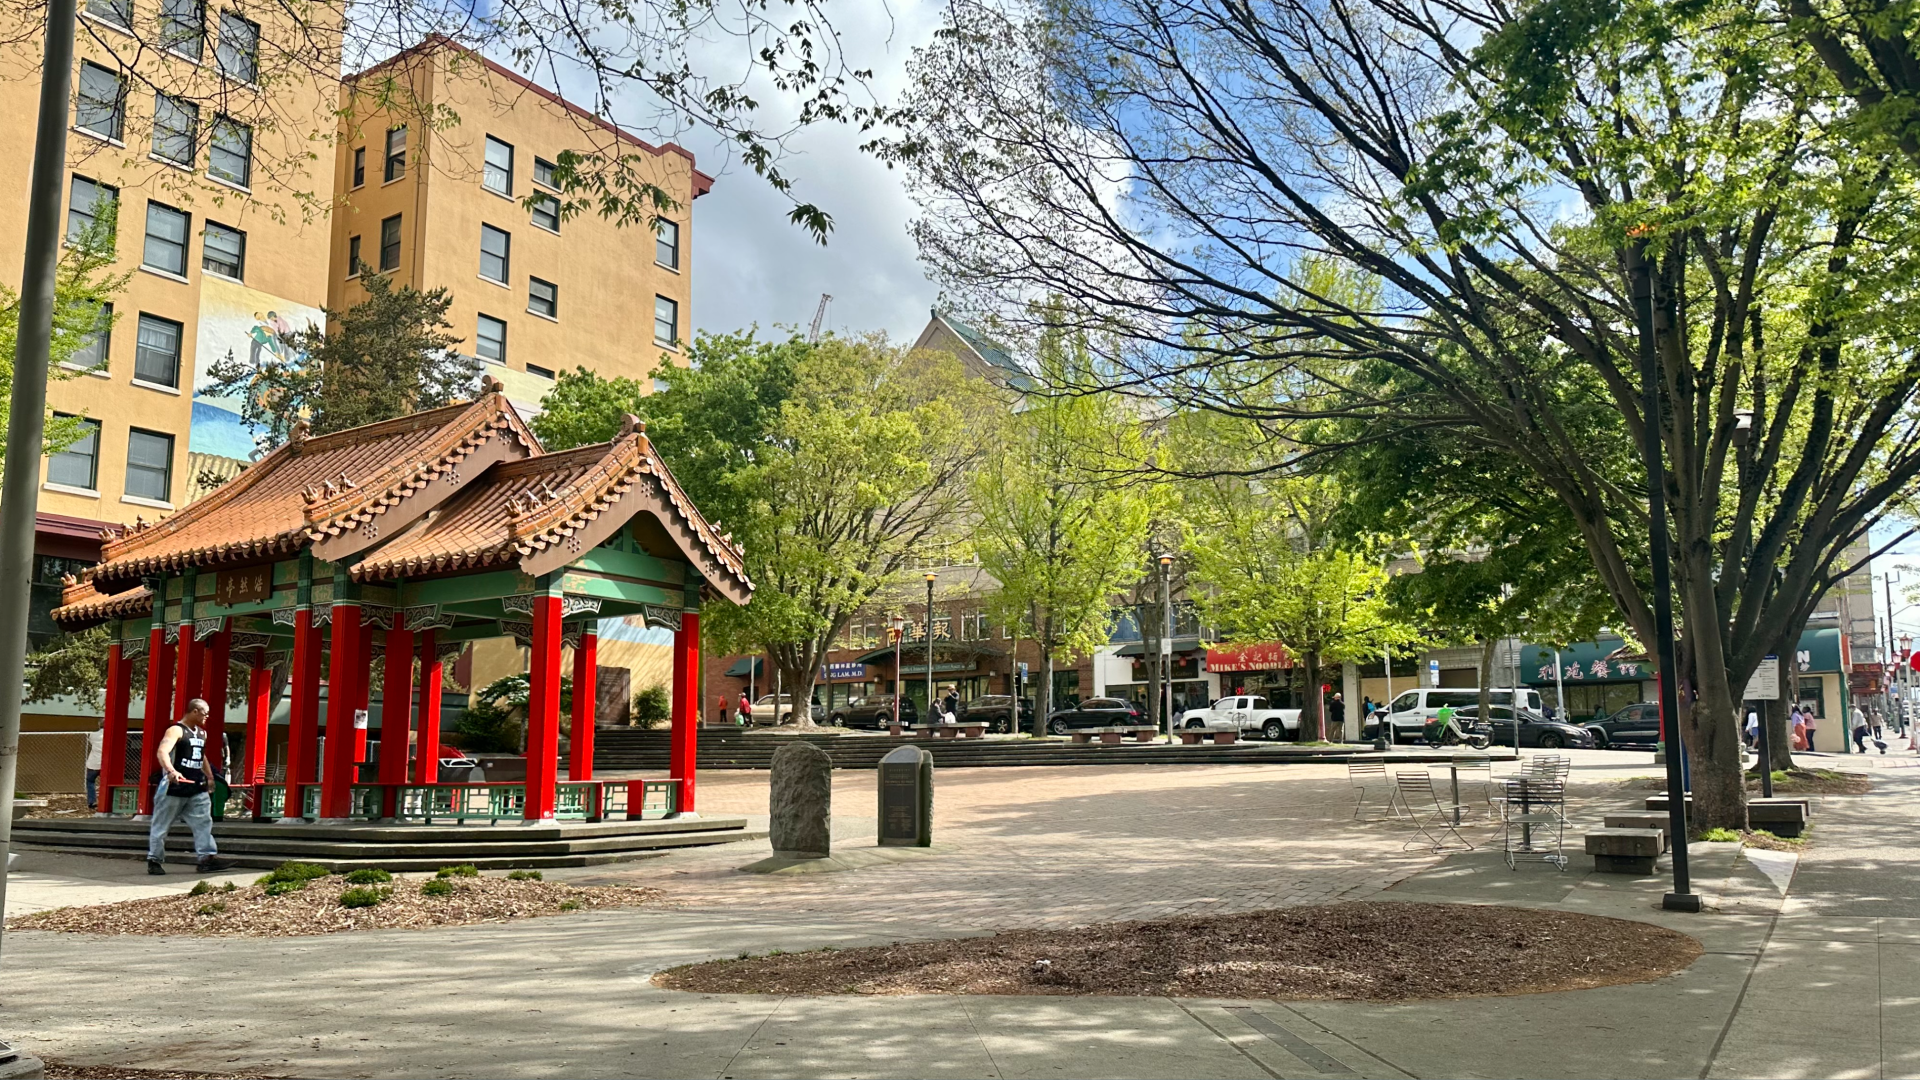 The Grand Pavilion with its red columns and pointed roofs is shown in Hing Hay Park, along with trees and an open plaza.